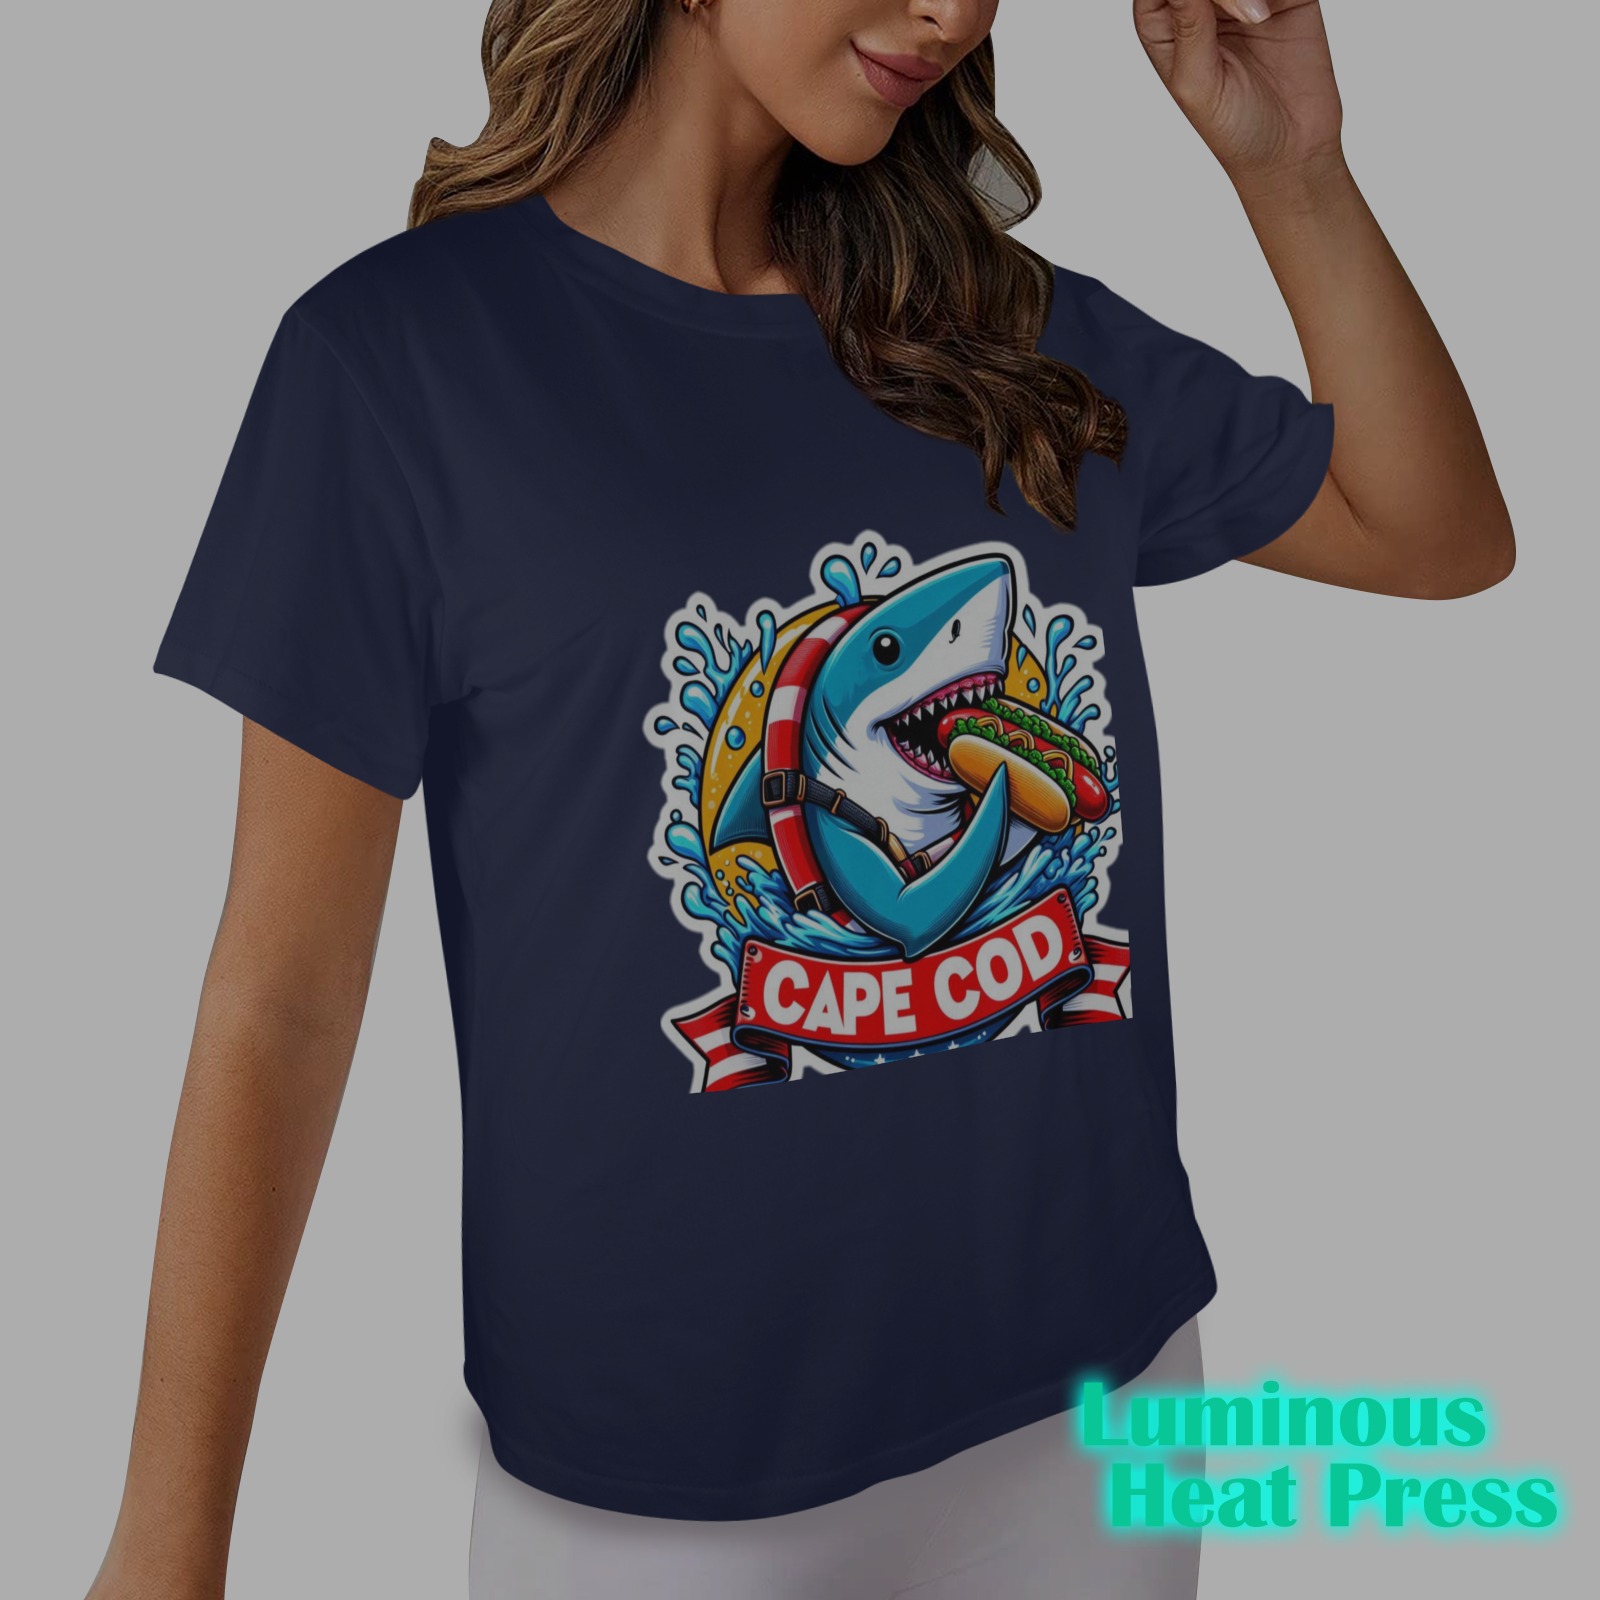 CAPE COD-GREAT WHITE EATING HOT DOG Women's Glow in the Dark T-shirt (Front Printing)